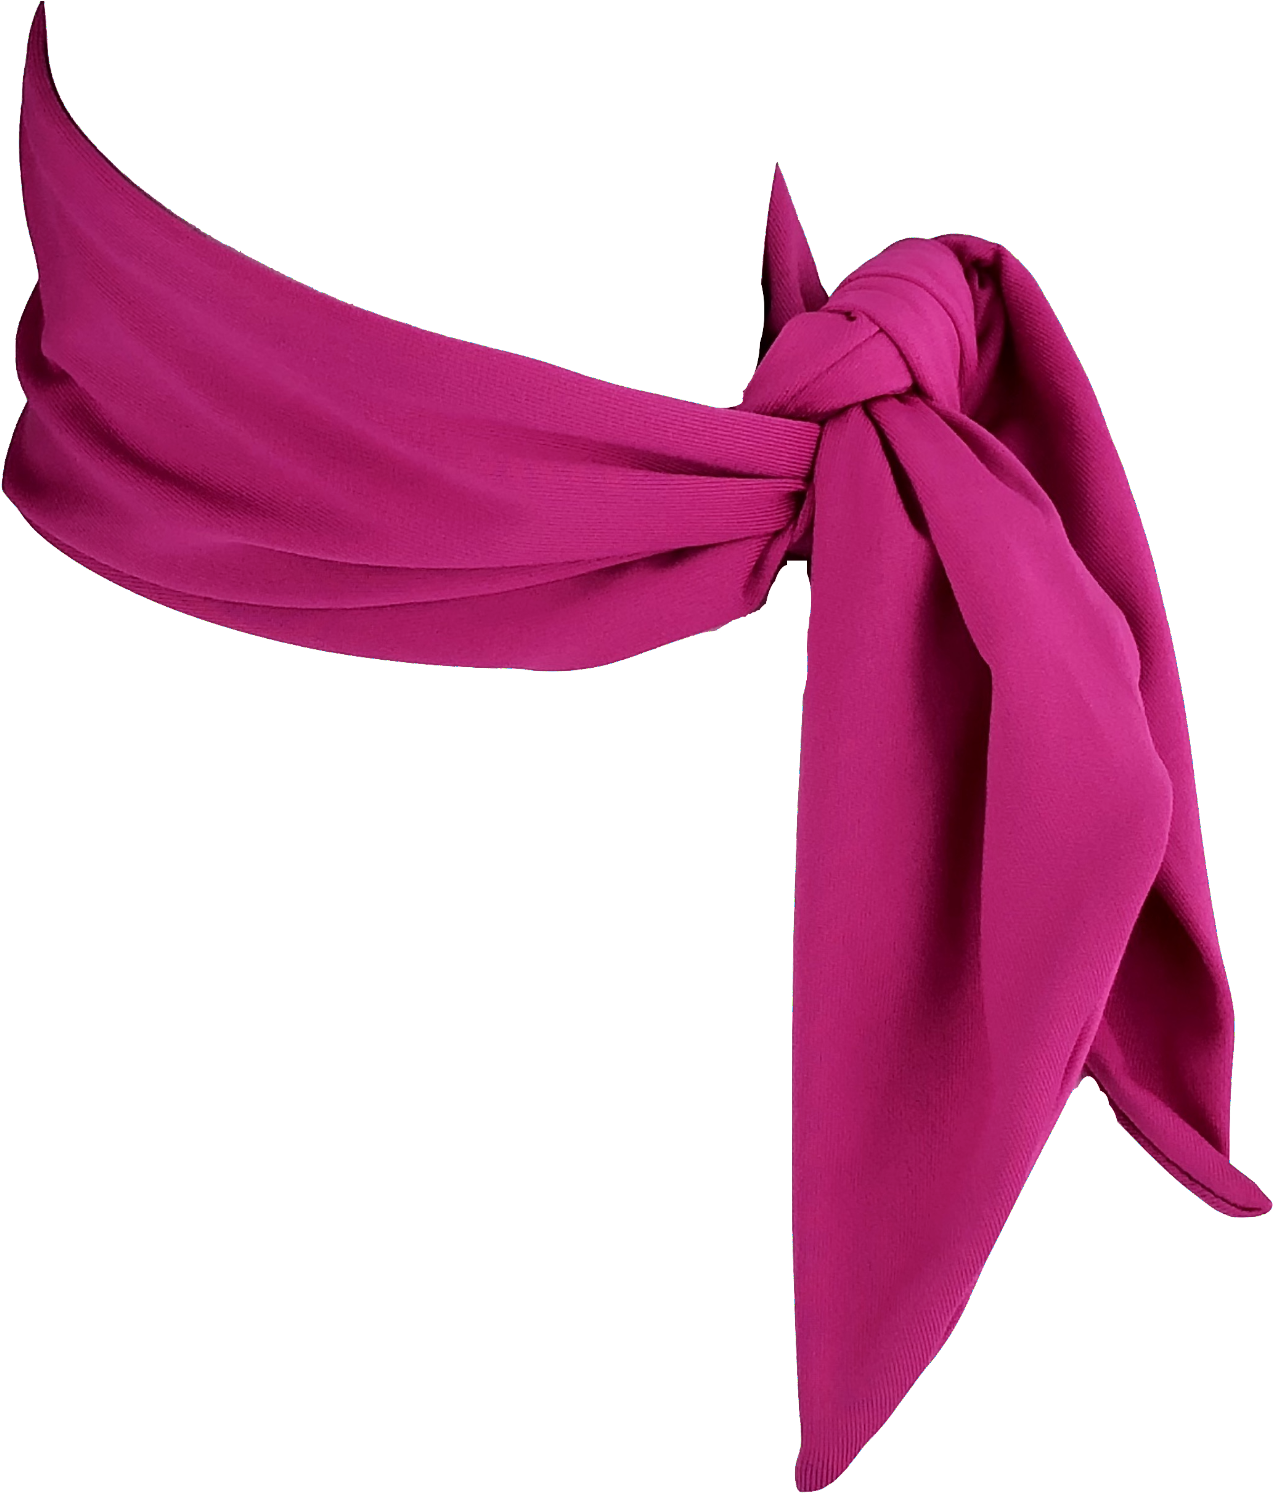 A Pink Scarf Tied To A Black Background